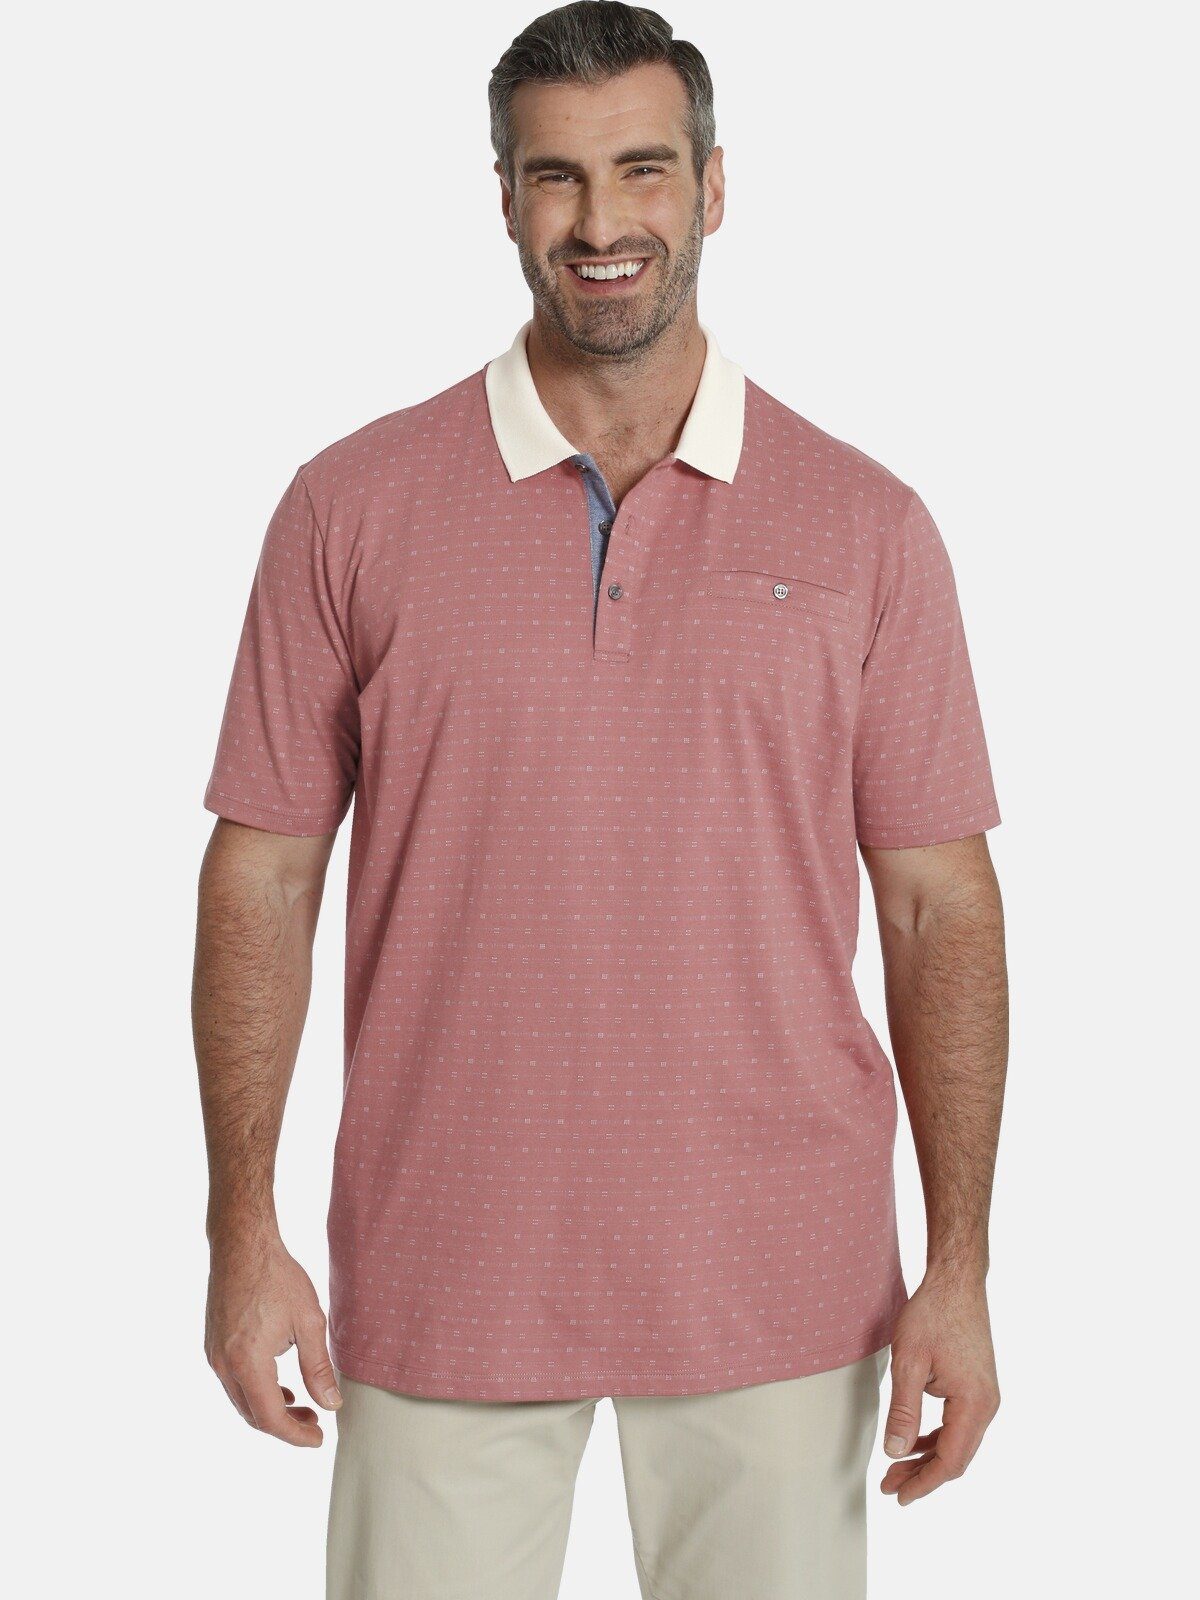 Charles Colby Poloshirt EARL Passform Retro-Stil bequeme MIKE